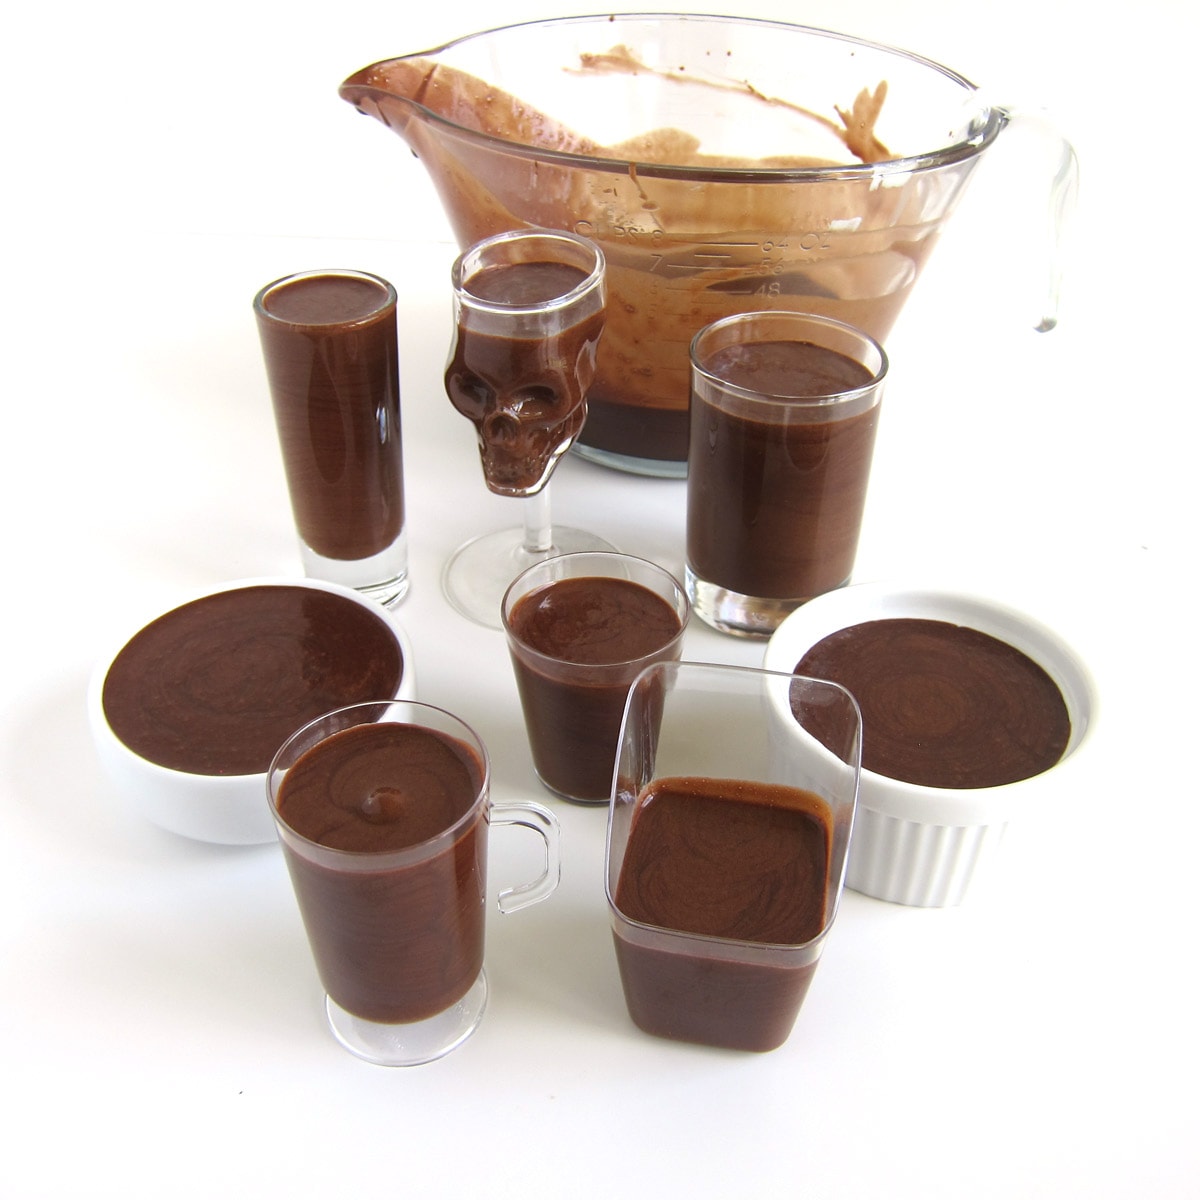 Chocolate mousse in a variety of cups and bowls.